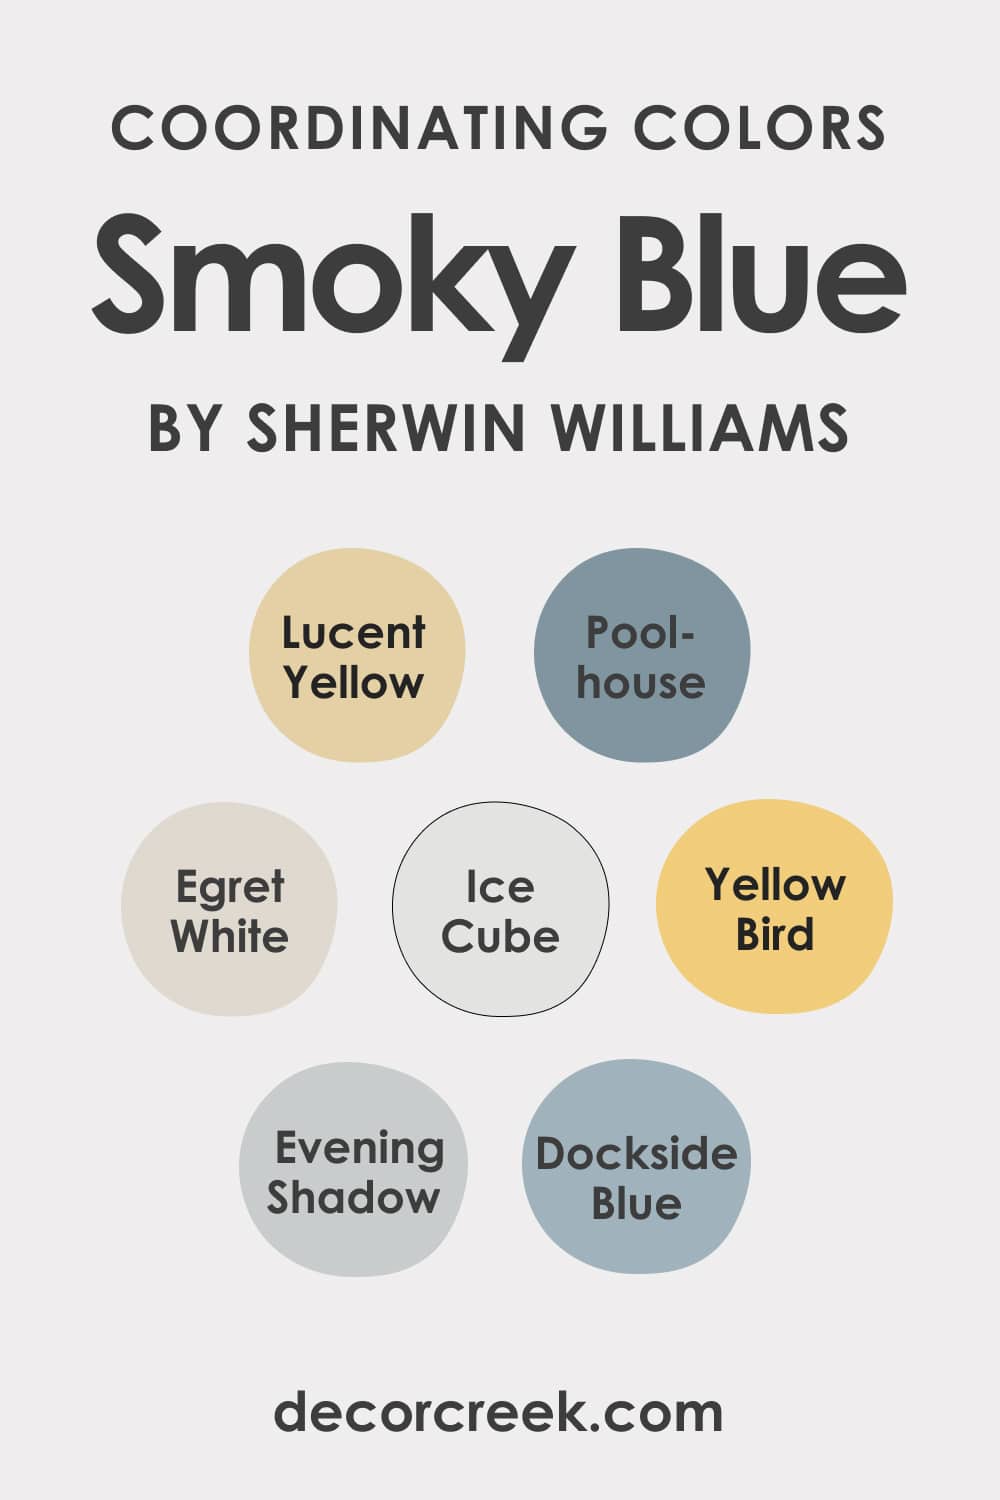 What Coordinating Colors Does SW Smoky Blue Paint Have?